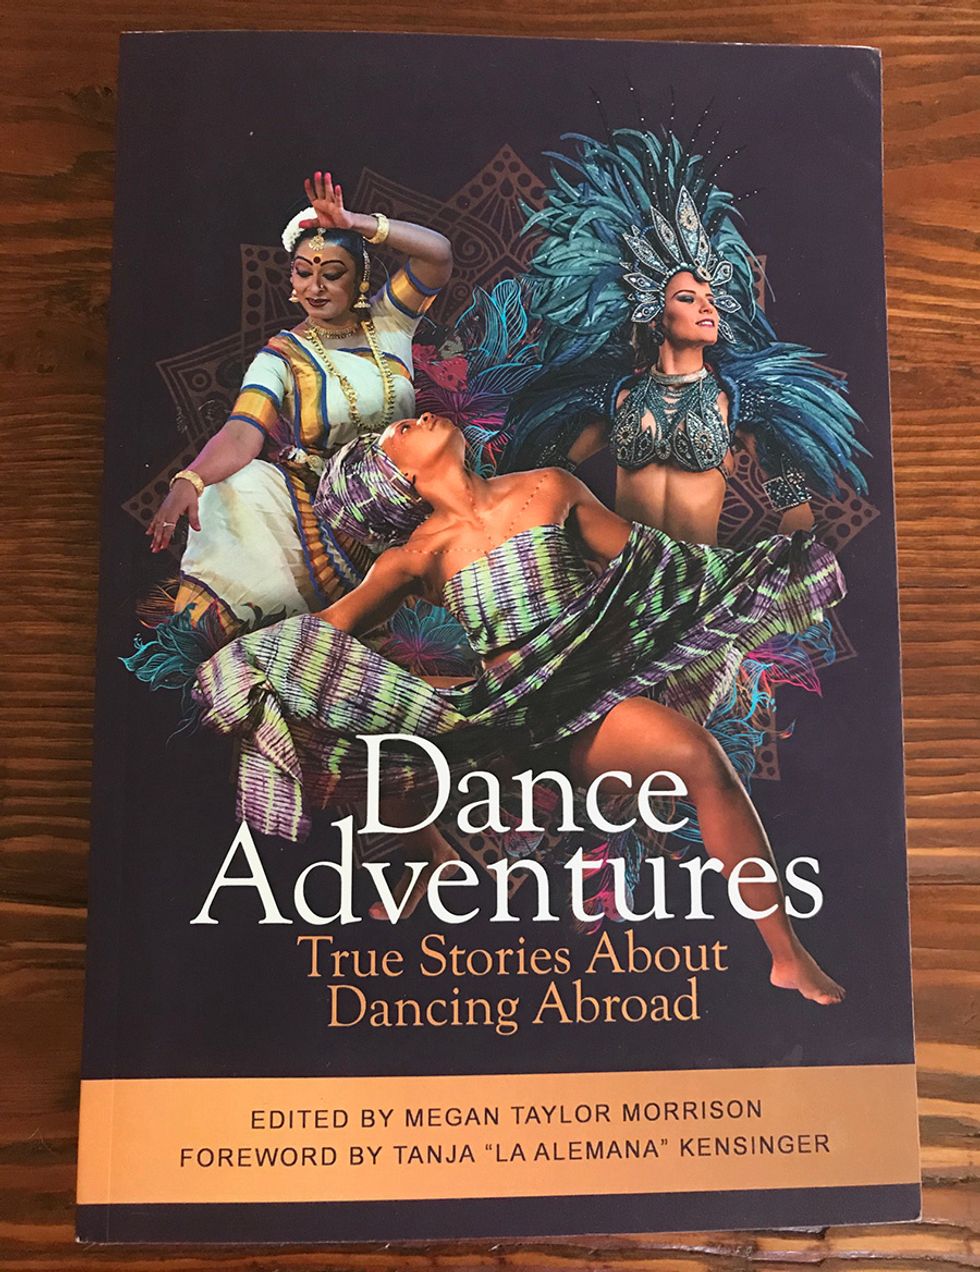 The cover of Dance Adventures, featuring three women in colorful costumes from different dance genres